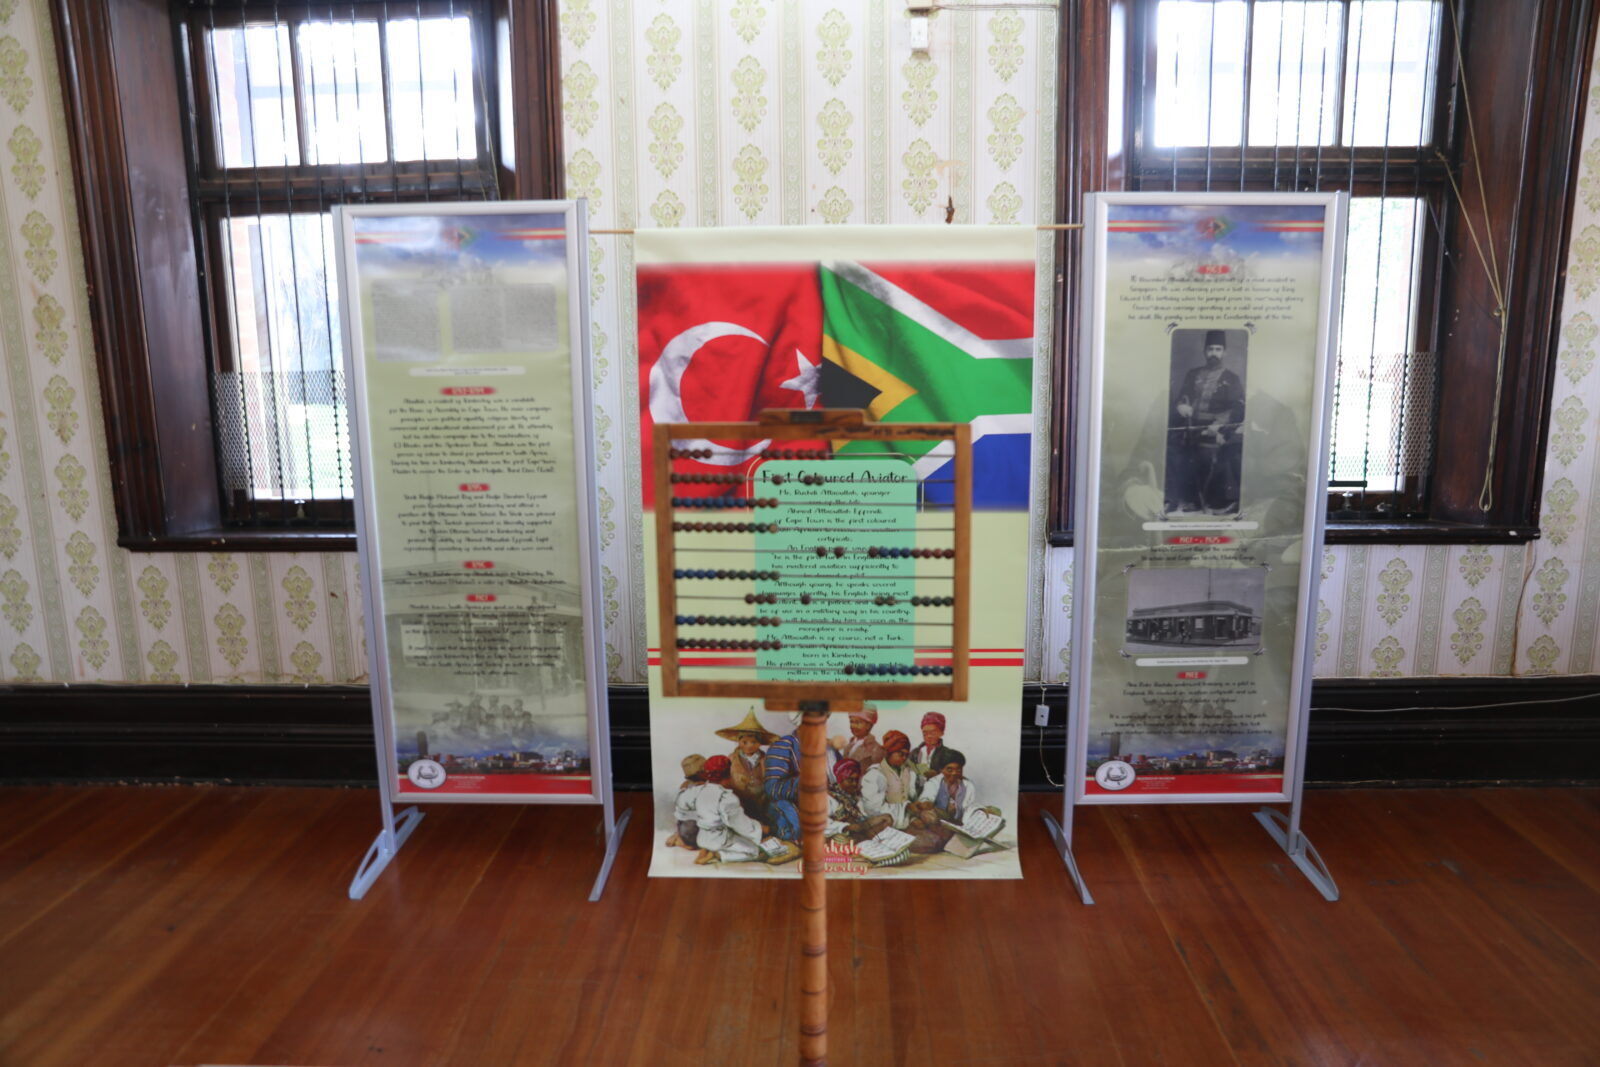 Türkiye-themed exhibition opens at South Africa's museum